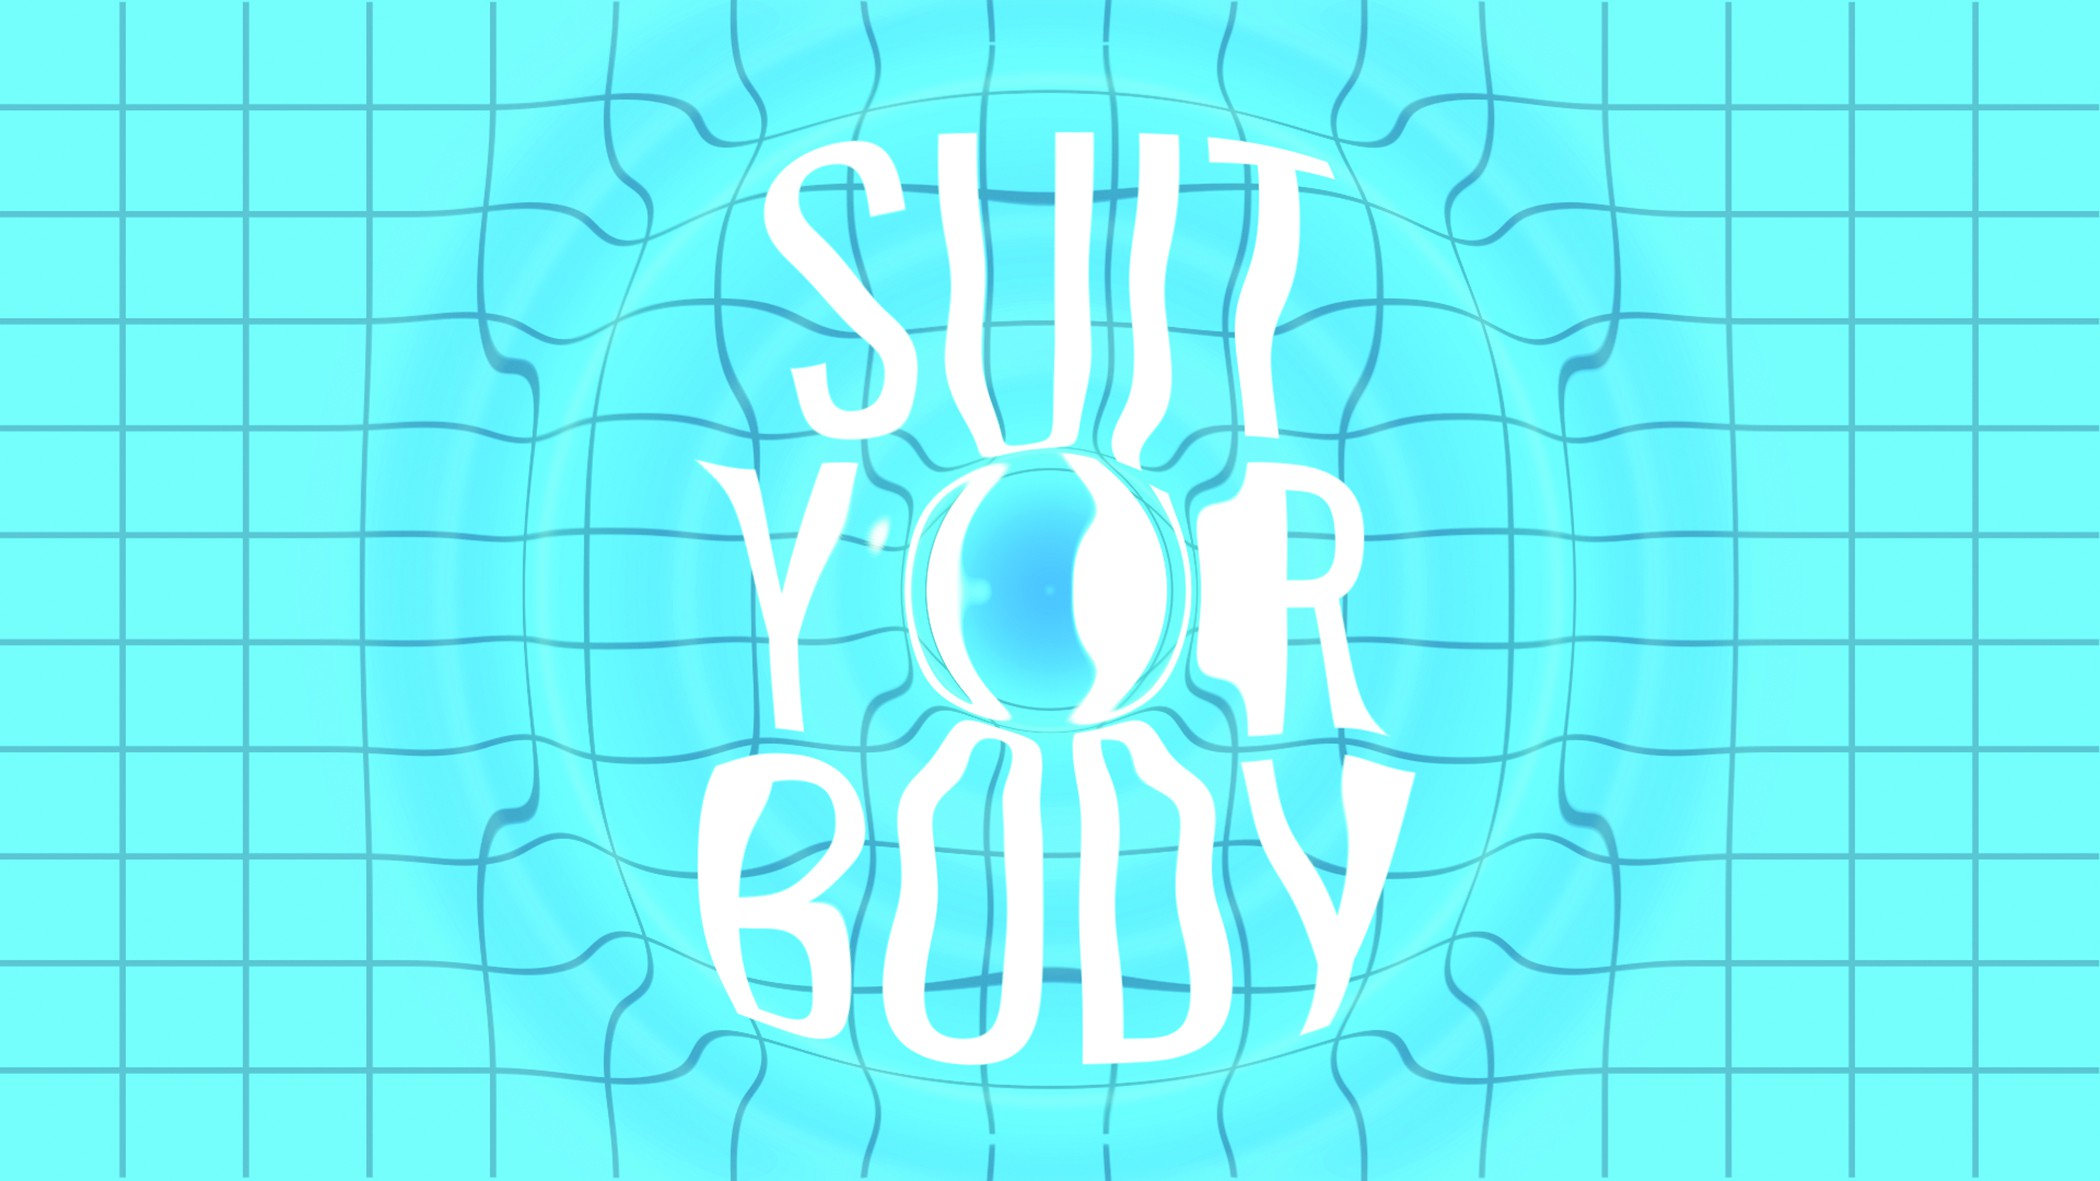 04-2020-FuF-Suit_Your_Body-Keyvisual-Quer-CMYK-300dpi